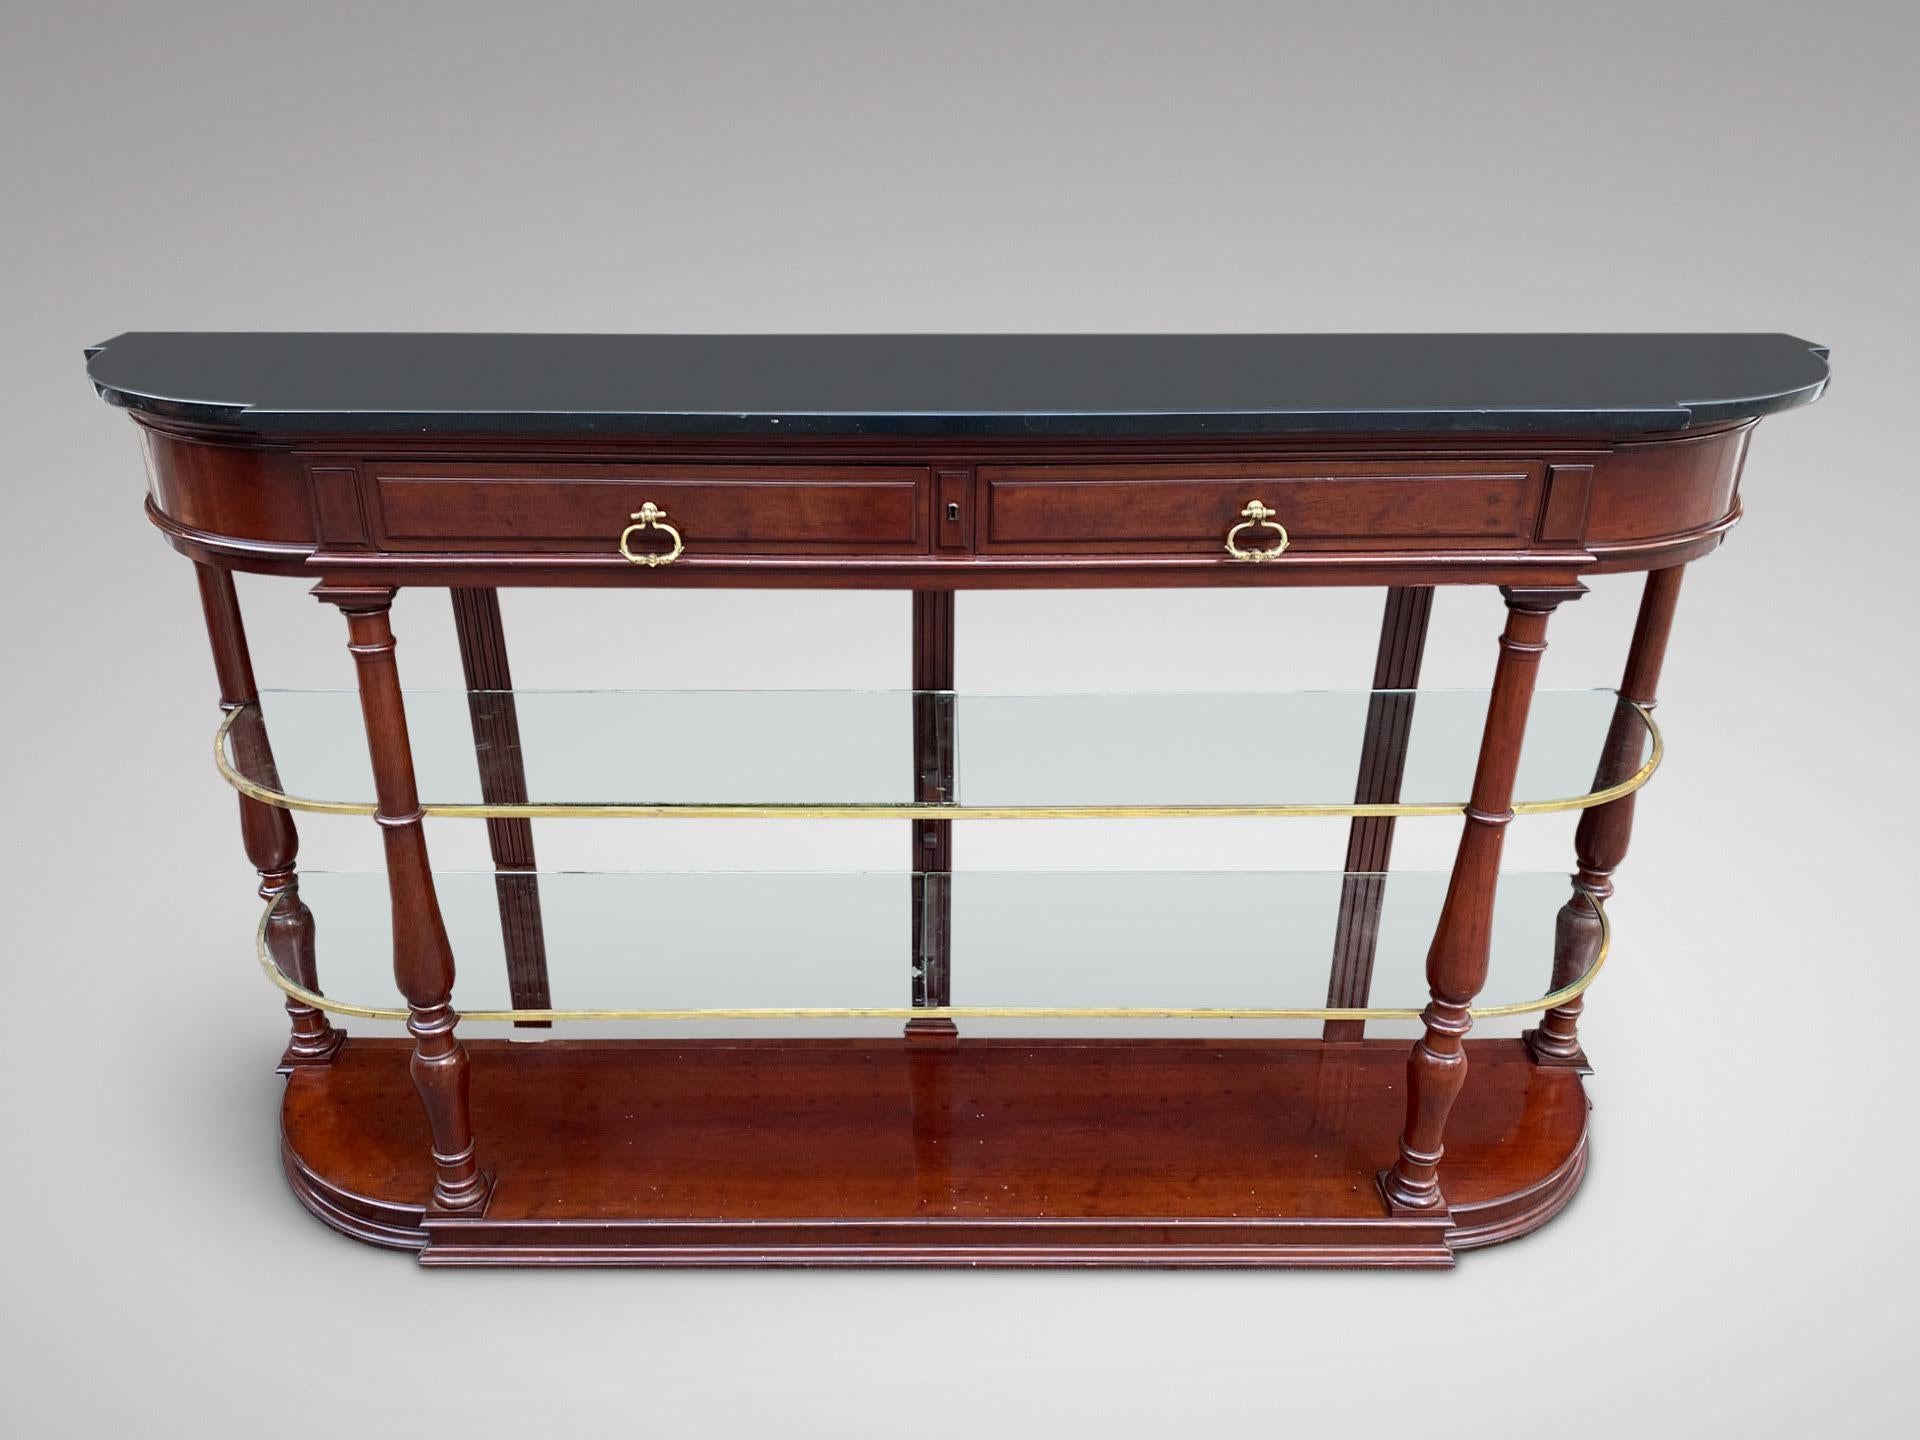 Regency 19th Century French Hardwood Console Table with Black Marble Top